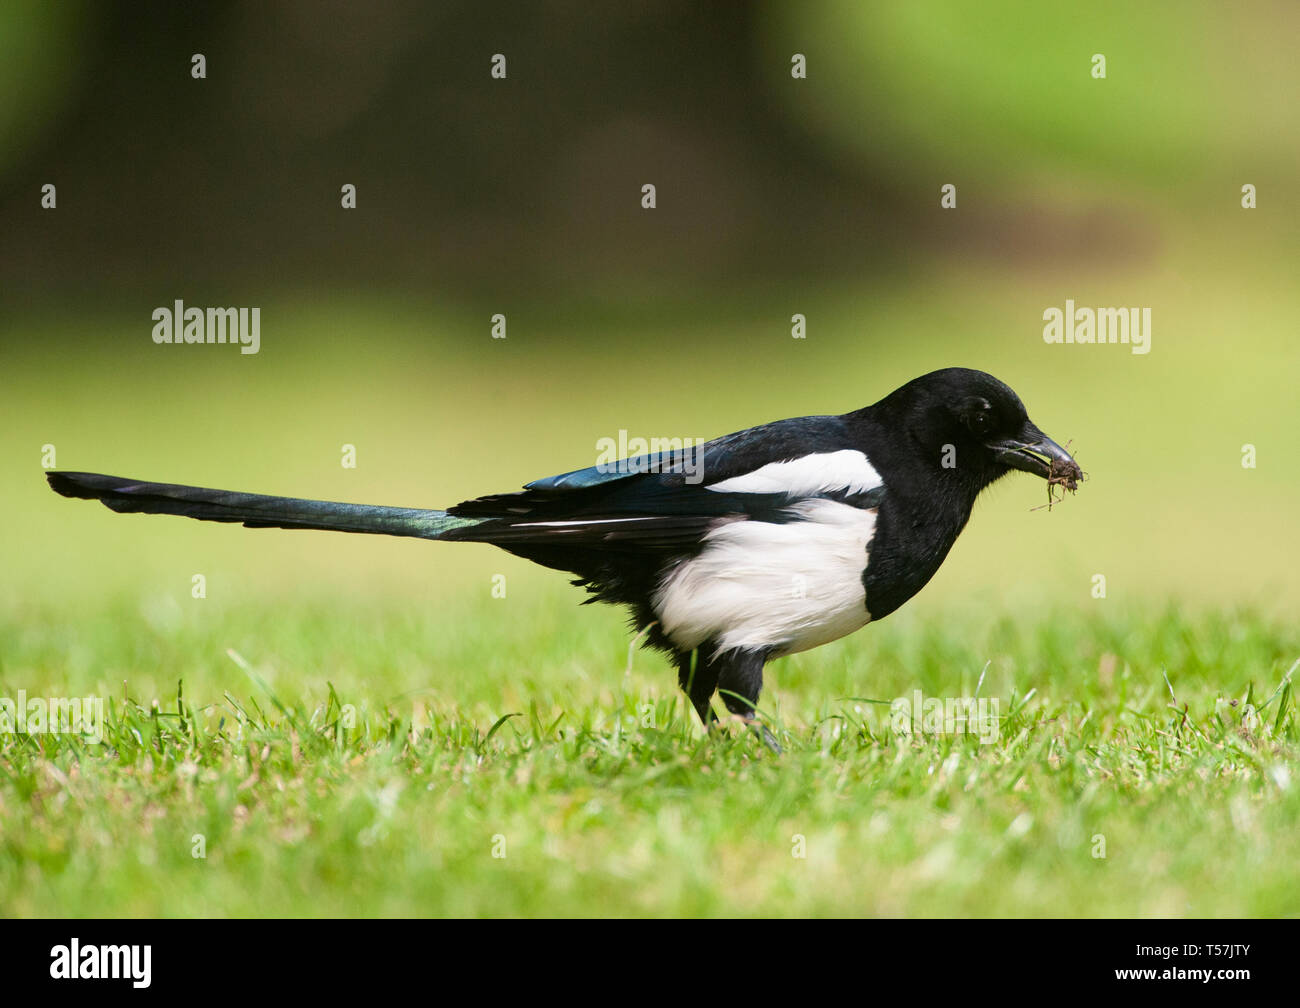 Magpie, Pica pica, also known as Black-billed magpie, gathers grass and moss for lining its nest of twigs, Queen's Park, London, United Kingdom Stock Photo